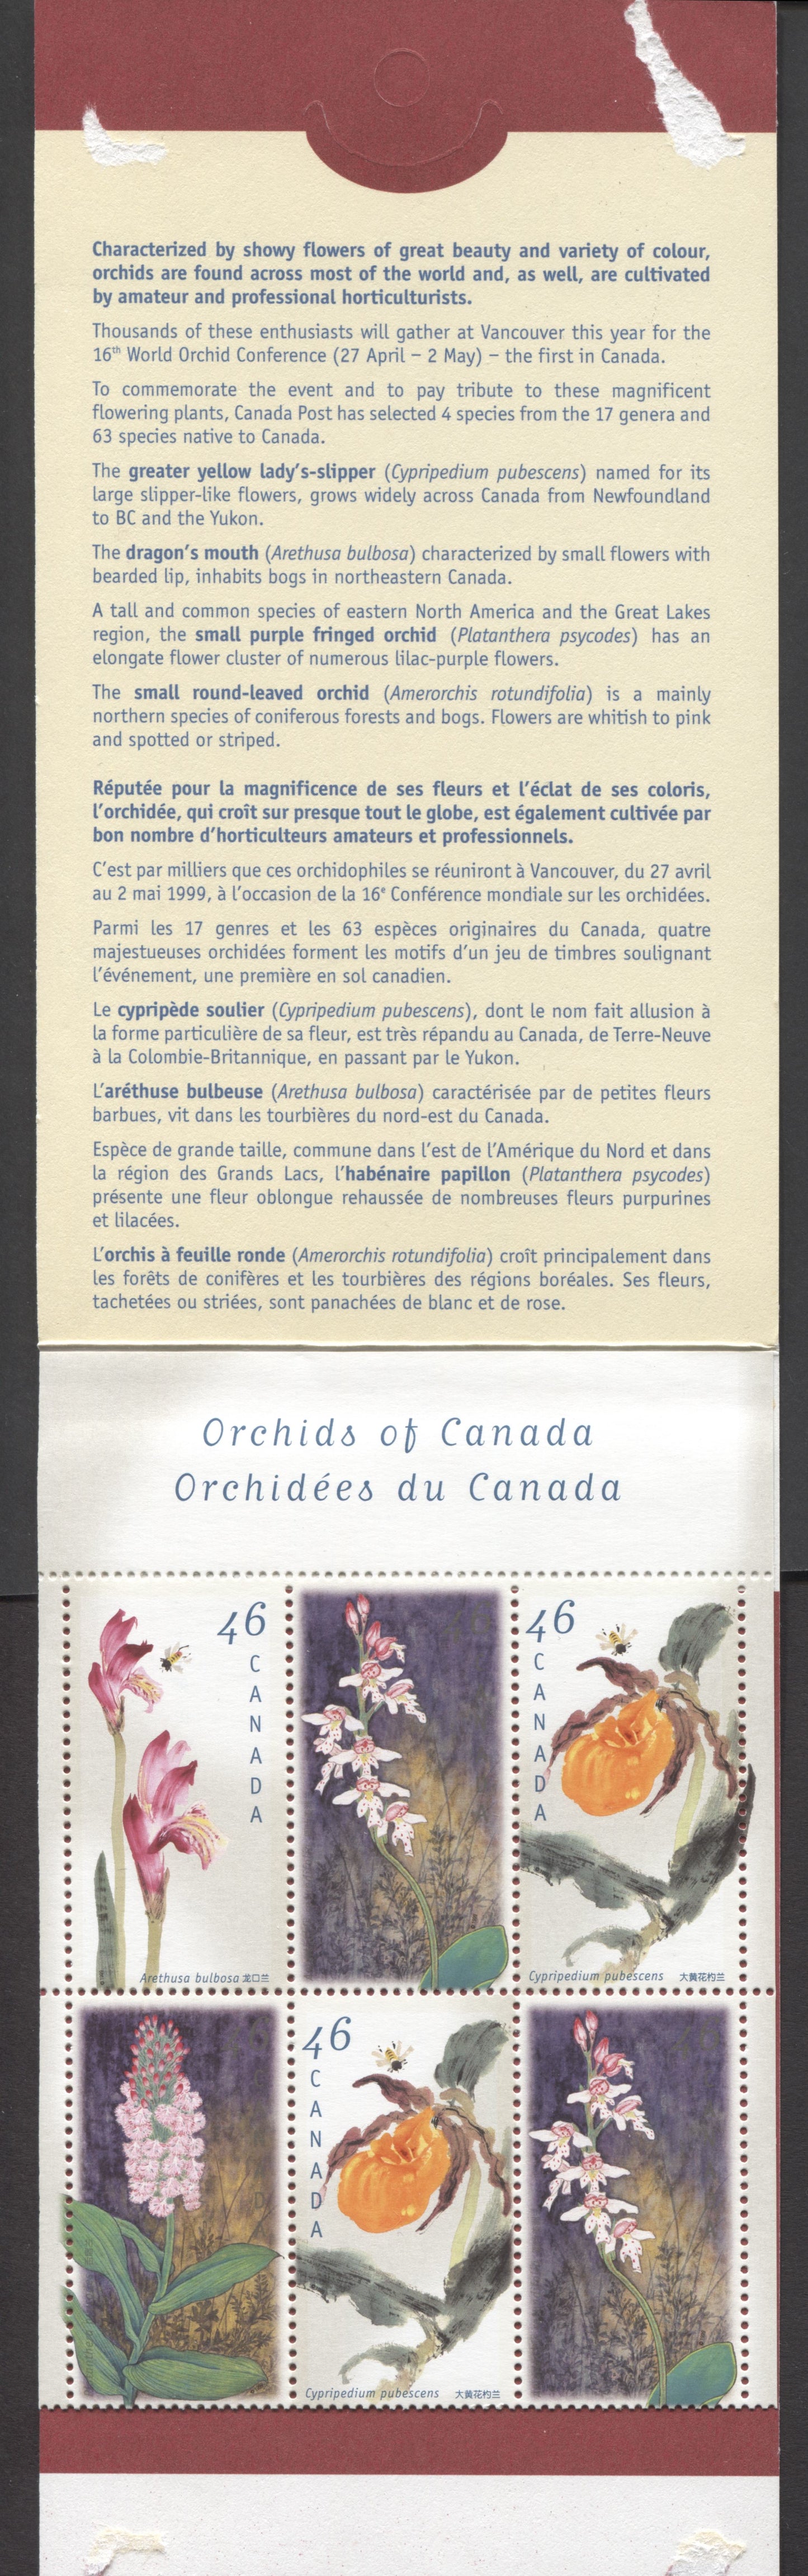 Canada #BK219a-b 1999 Orchids Issue, Complete $5.52 Booklet, Tullis Russell Coatings Paper, Dead Paper, 4 mm GT-4 Tagging